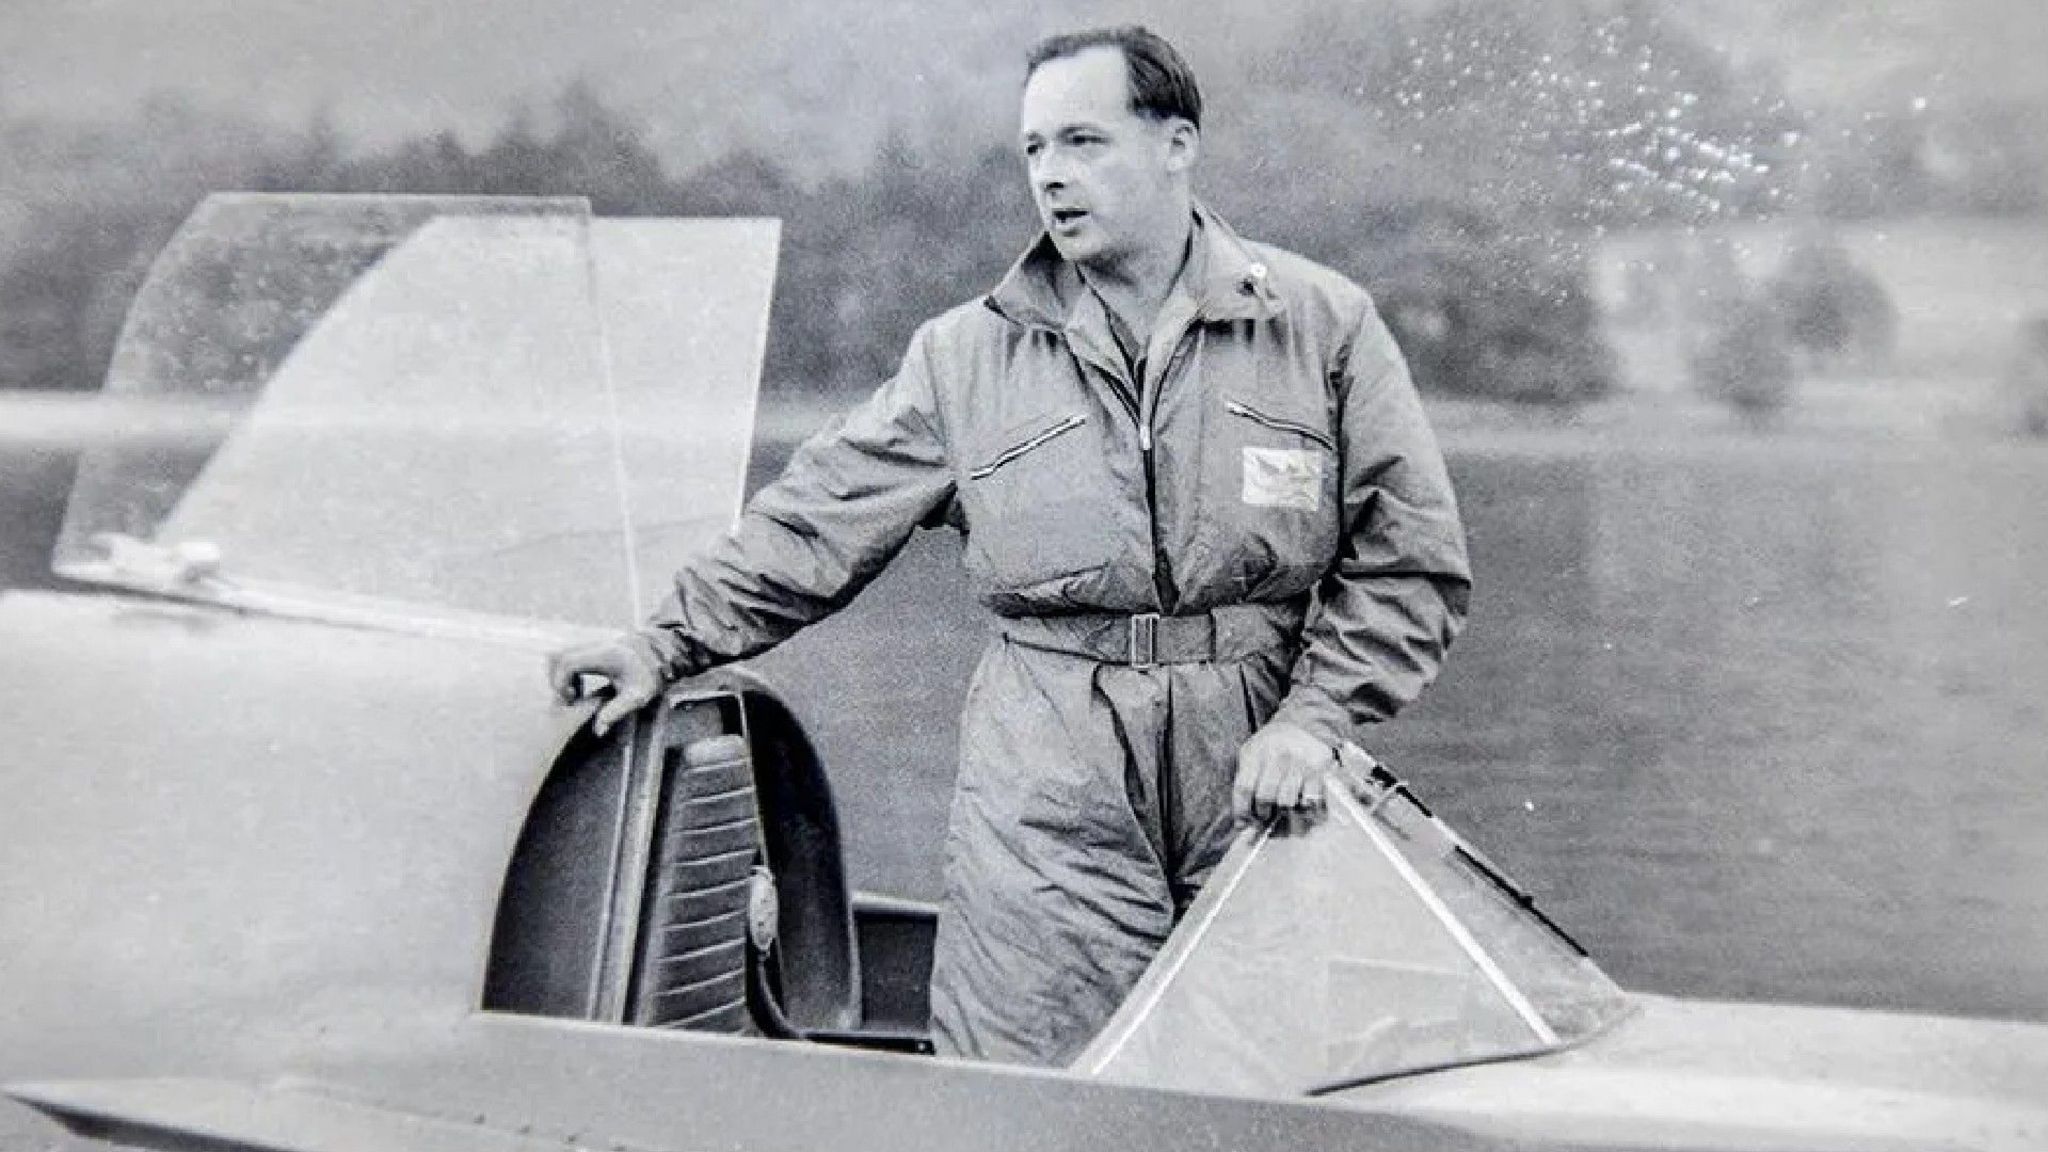 Donald Campbell was pictured preparing for a test run of his boat Bluebird